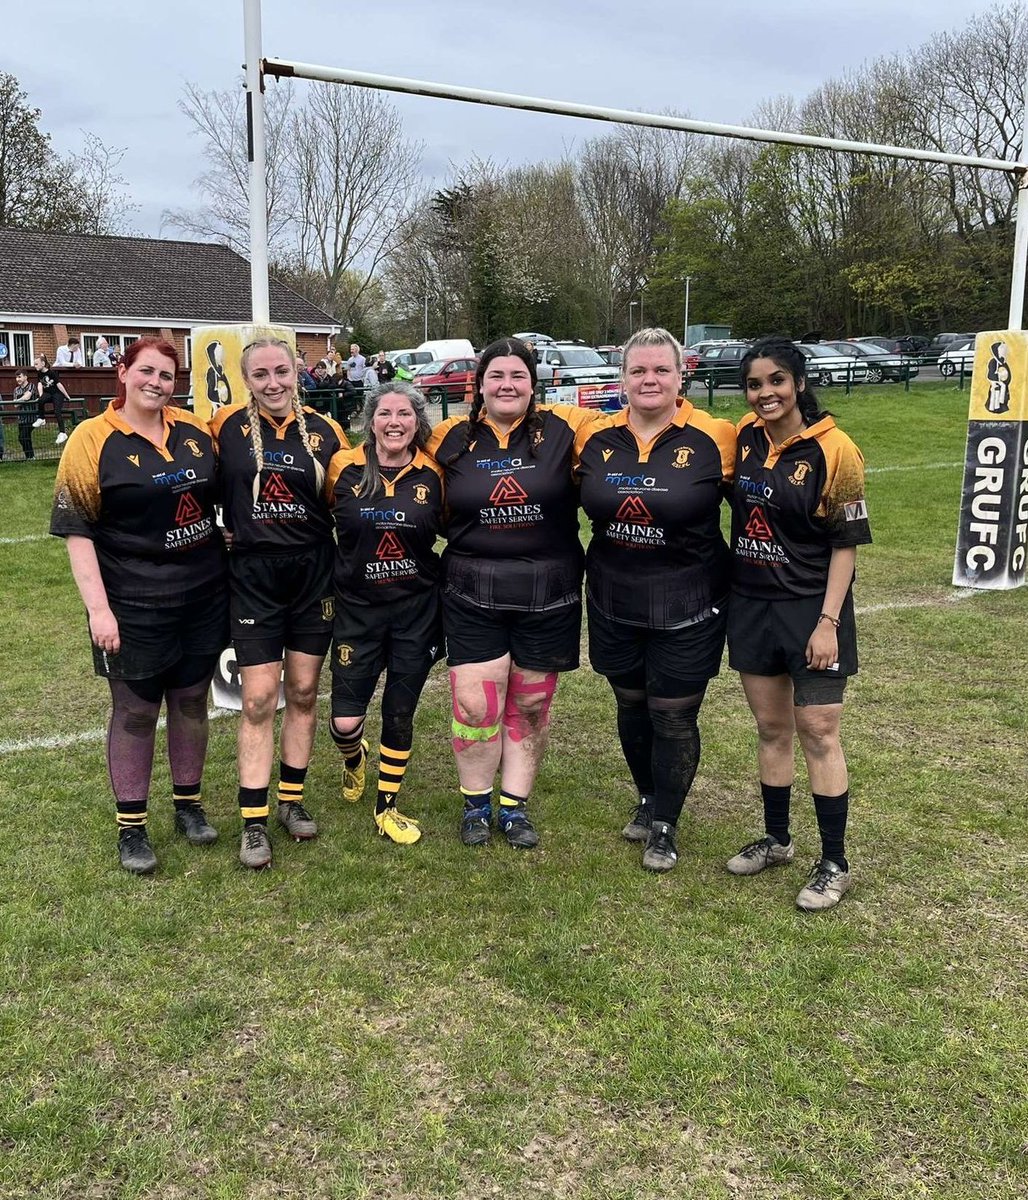 A week has passed since my first full contact game. Fantastic to finally have a women's team - the Phoenixes @GuisboroughRUFC so proud of all who made this happen 💕♀️ and some wonderful coaches. @CathSpence8 you will remember the seeds of Folkestone team starting to grow. X